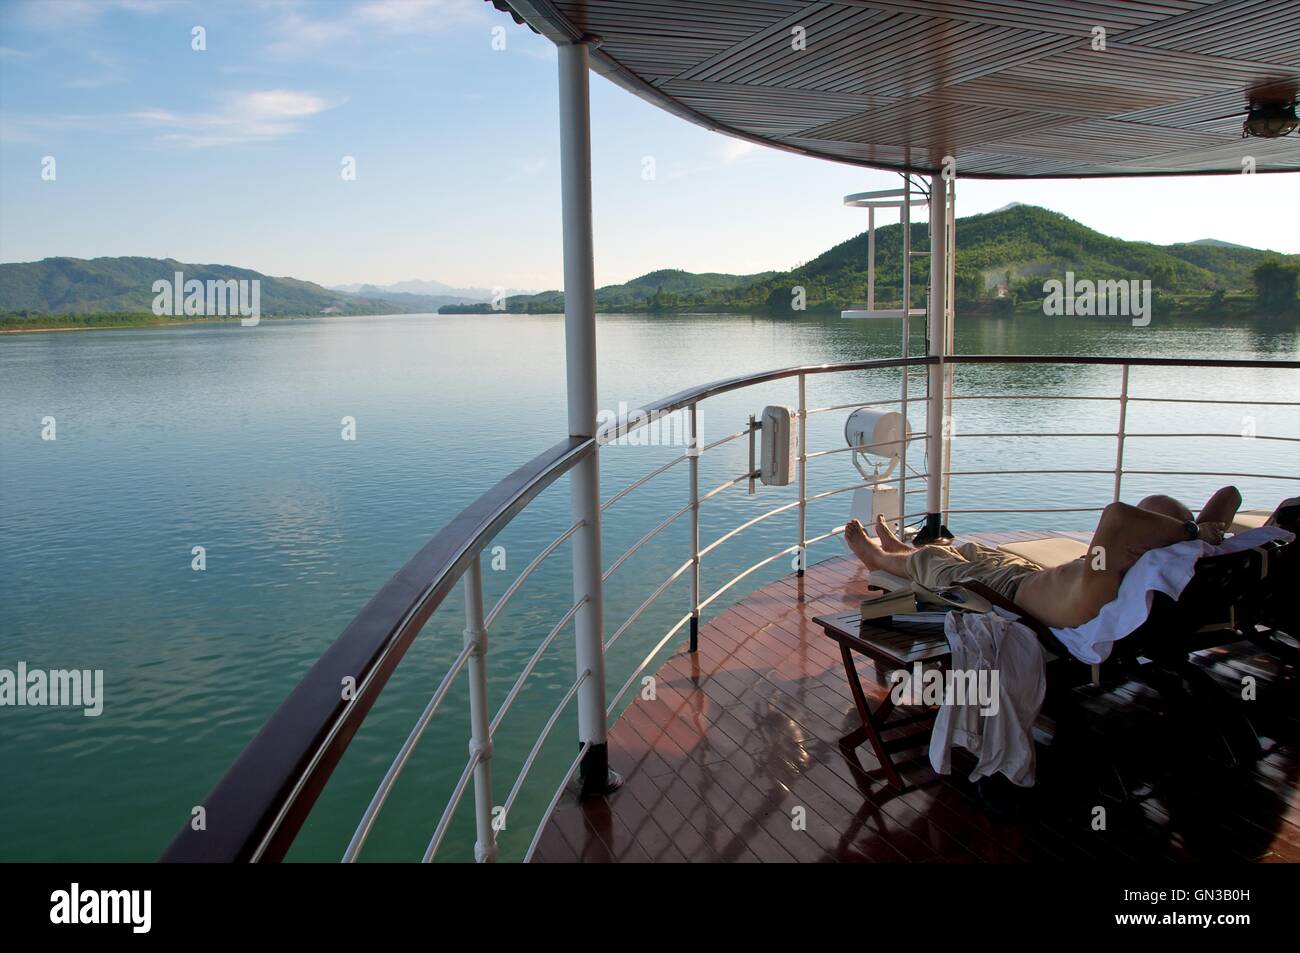 Red River, Vietnam - 17 November 2015. Enjoying the unfolding view along the Red River from the deck of a cruise ship. Stock Photo